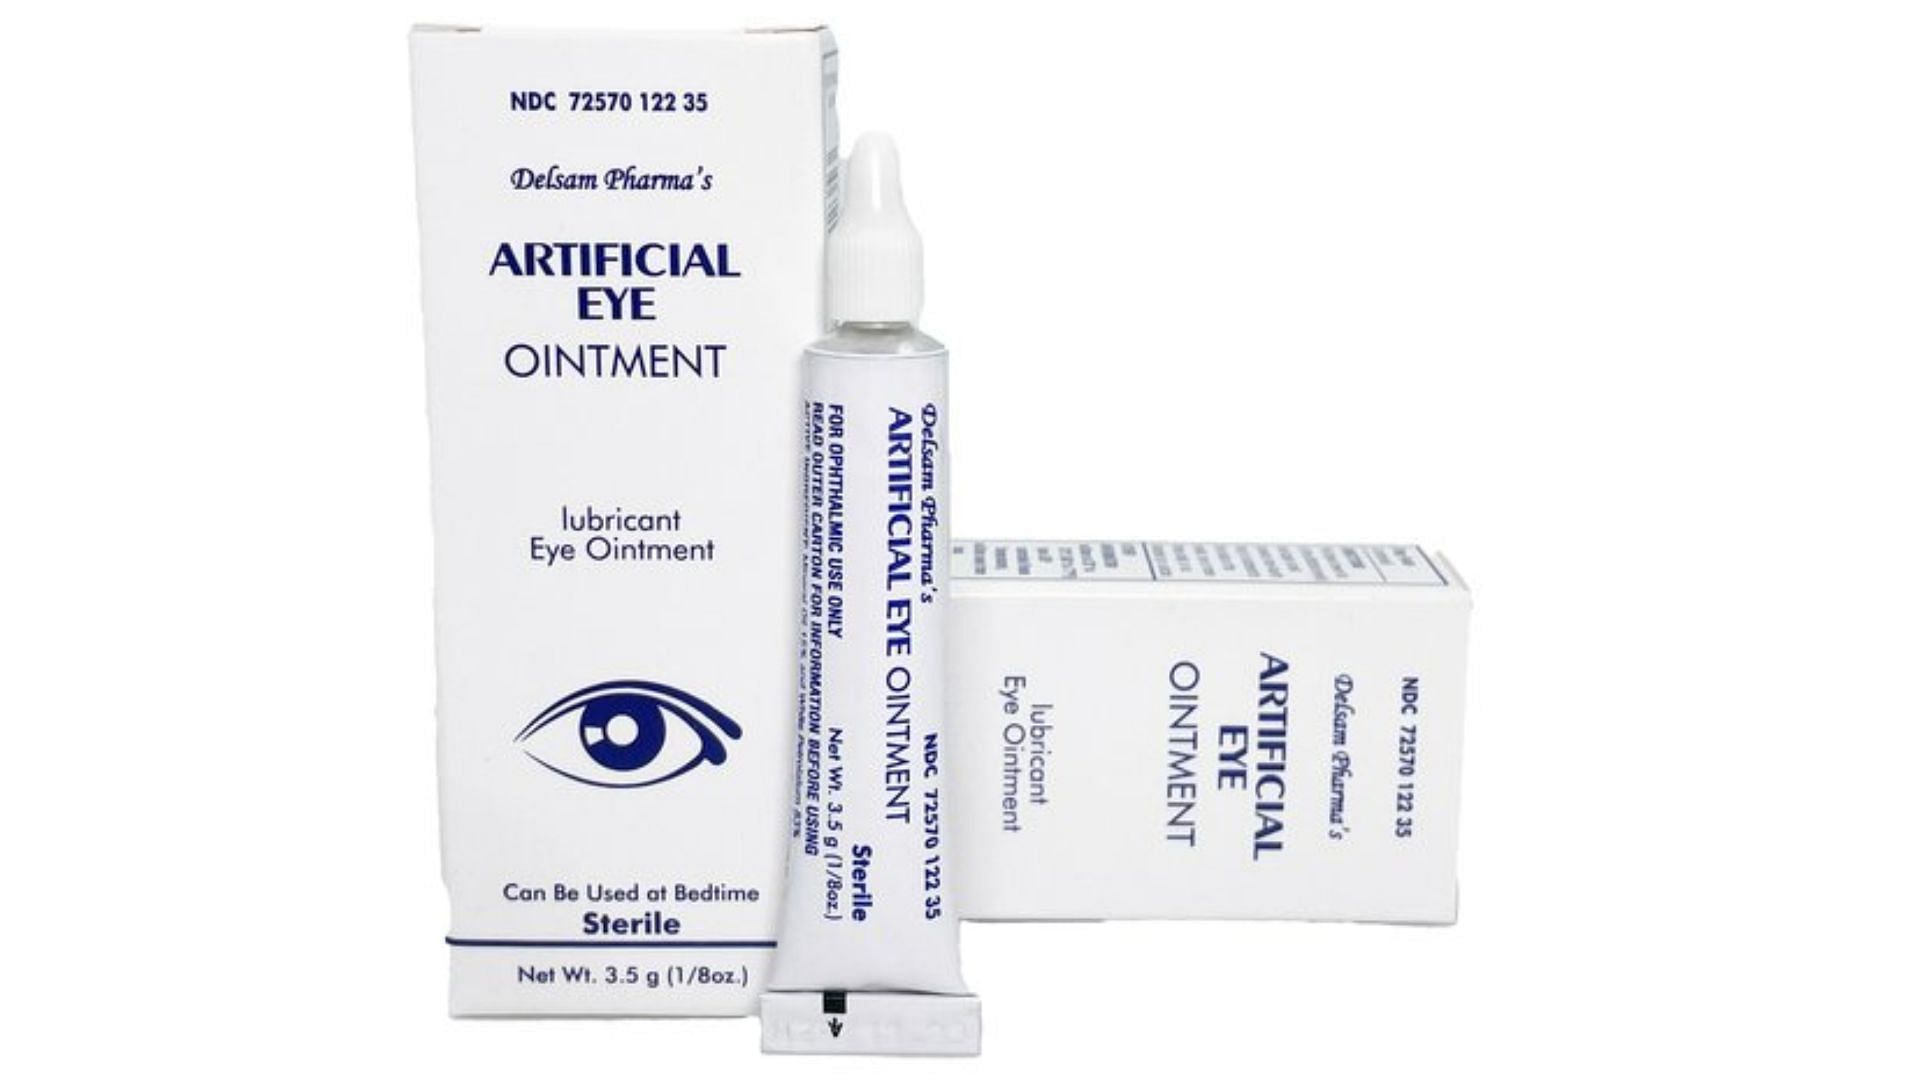 the recalled Delsam Pharma&rsquo;s Artificial Eye Ointment (Image via FDA)